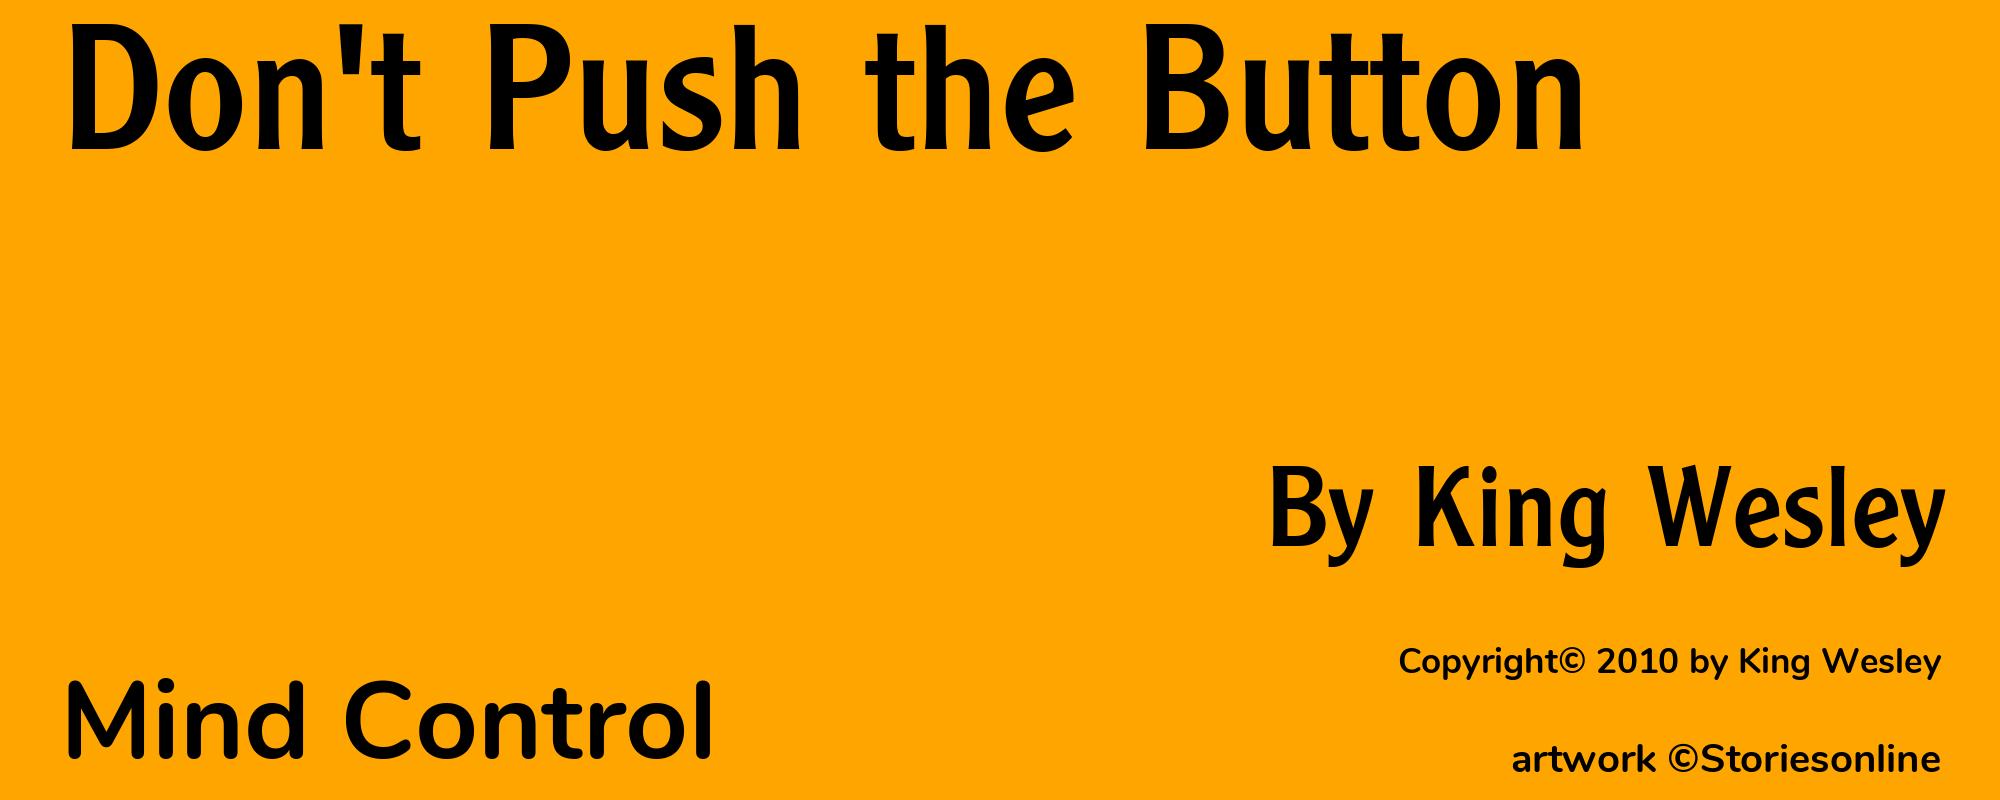 Don't Push the Button - Cover